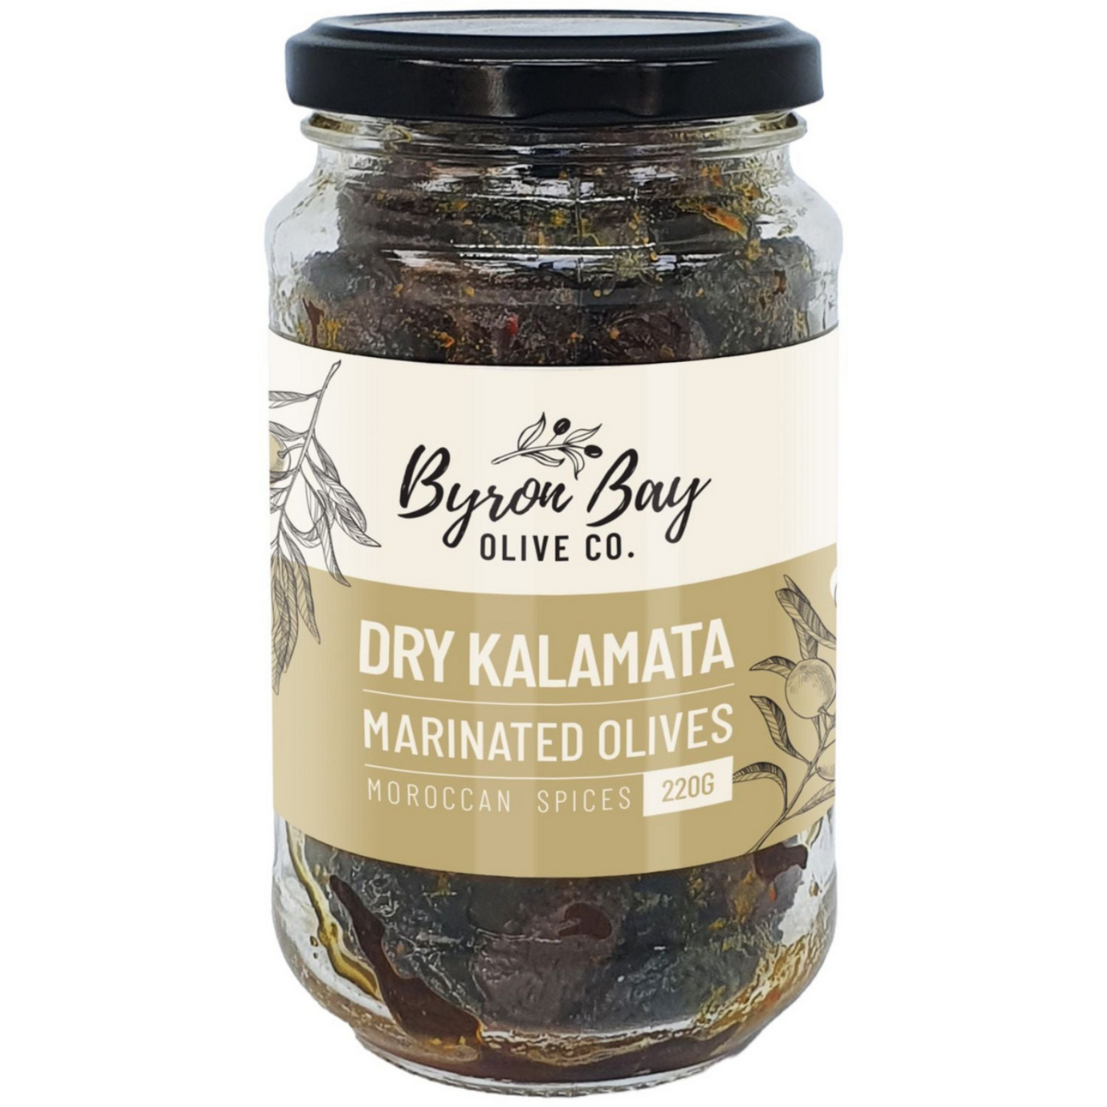 Dry Kalamata Olives with Moroccan Spices  Byron Bay Olive Co. Olives byron-bay-olives.myshopify.com Byron Bay Olive Company